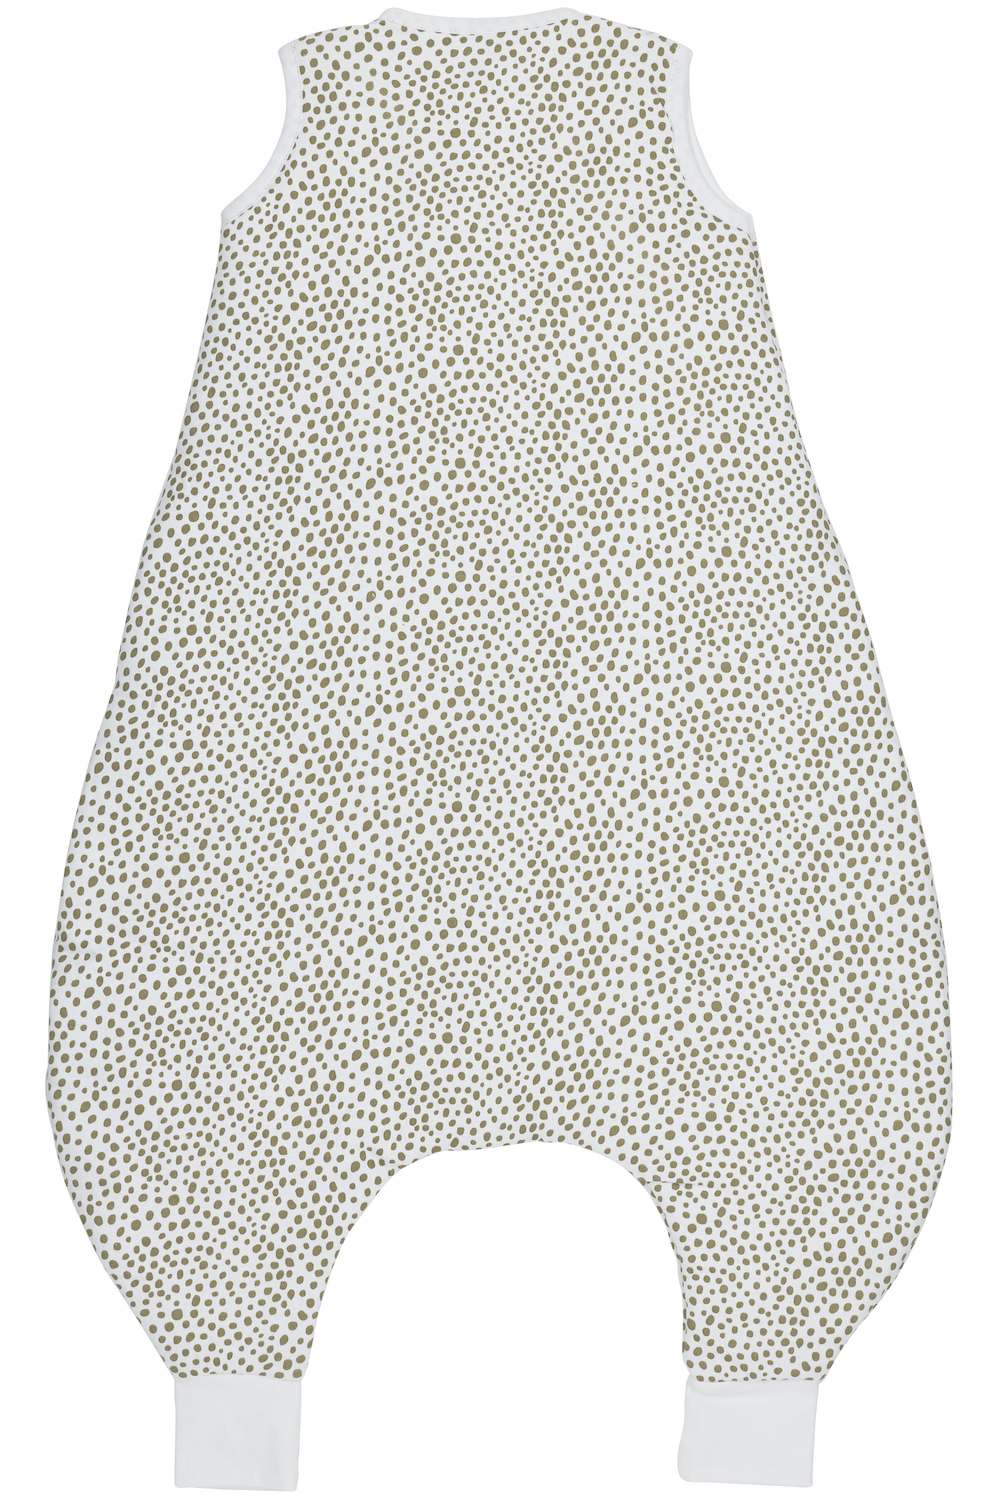 Baby winter slaapoverall jumper Cheetah - taupe - 104cm